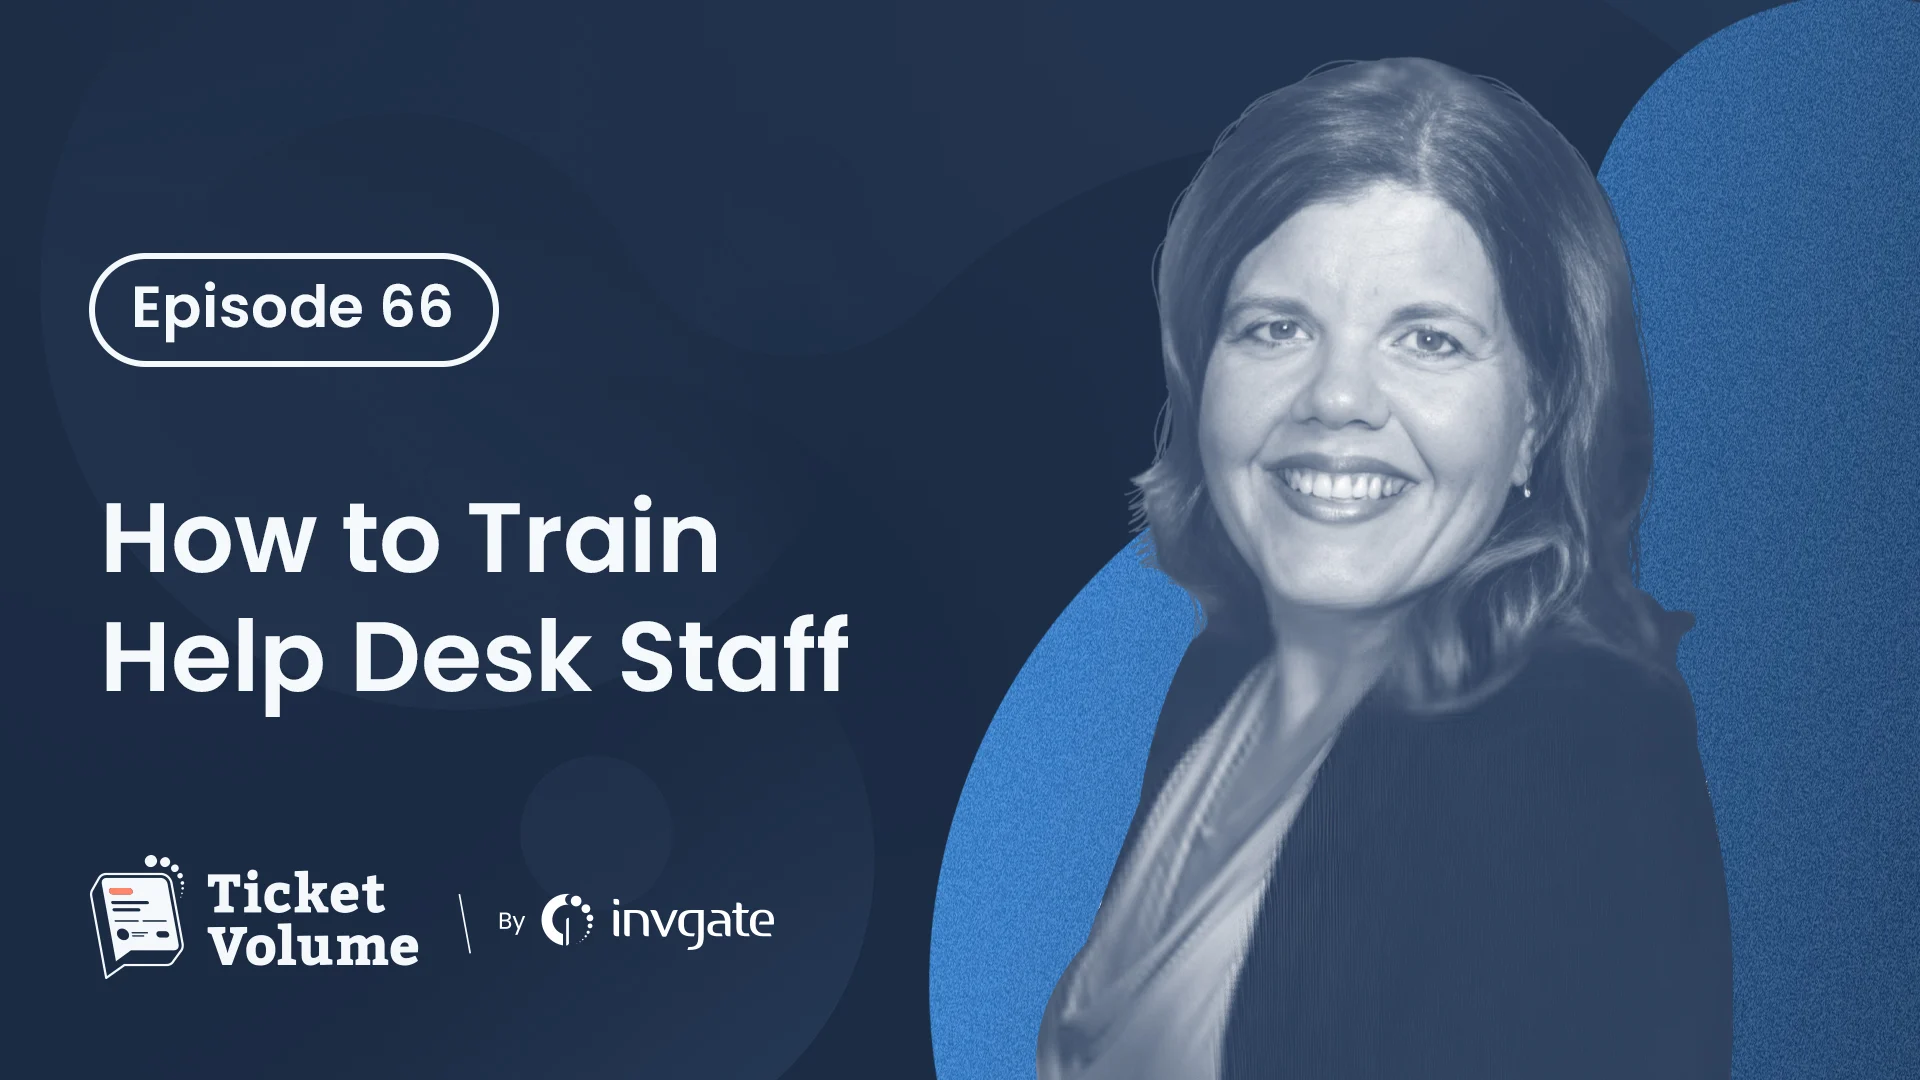 Lisa Schwartz on How to Train Help Desk Staff and What’s Next in ITSM